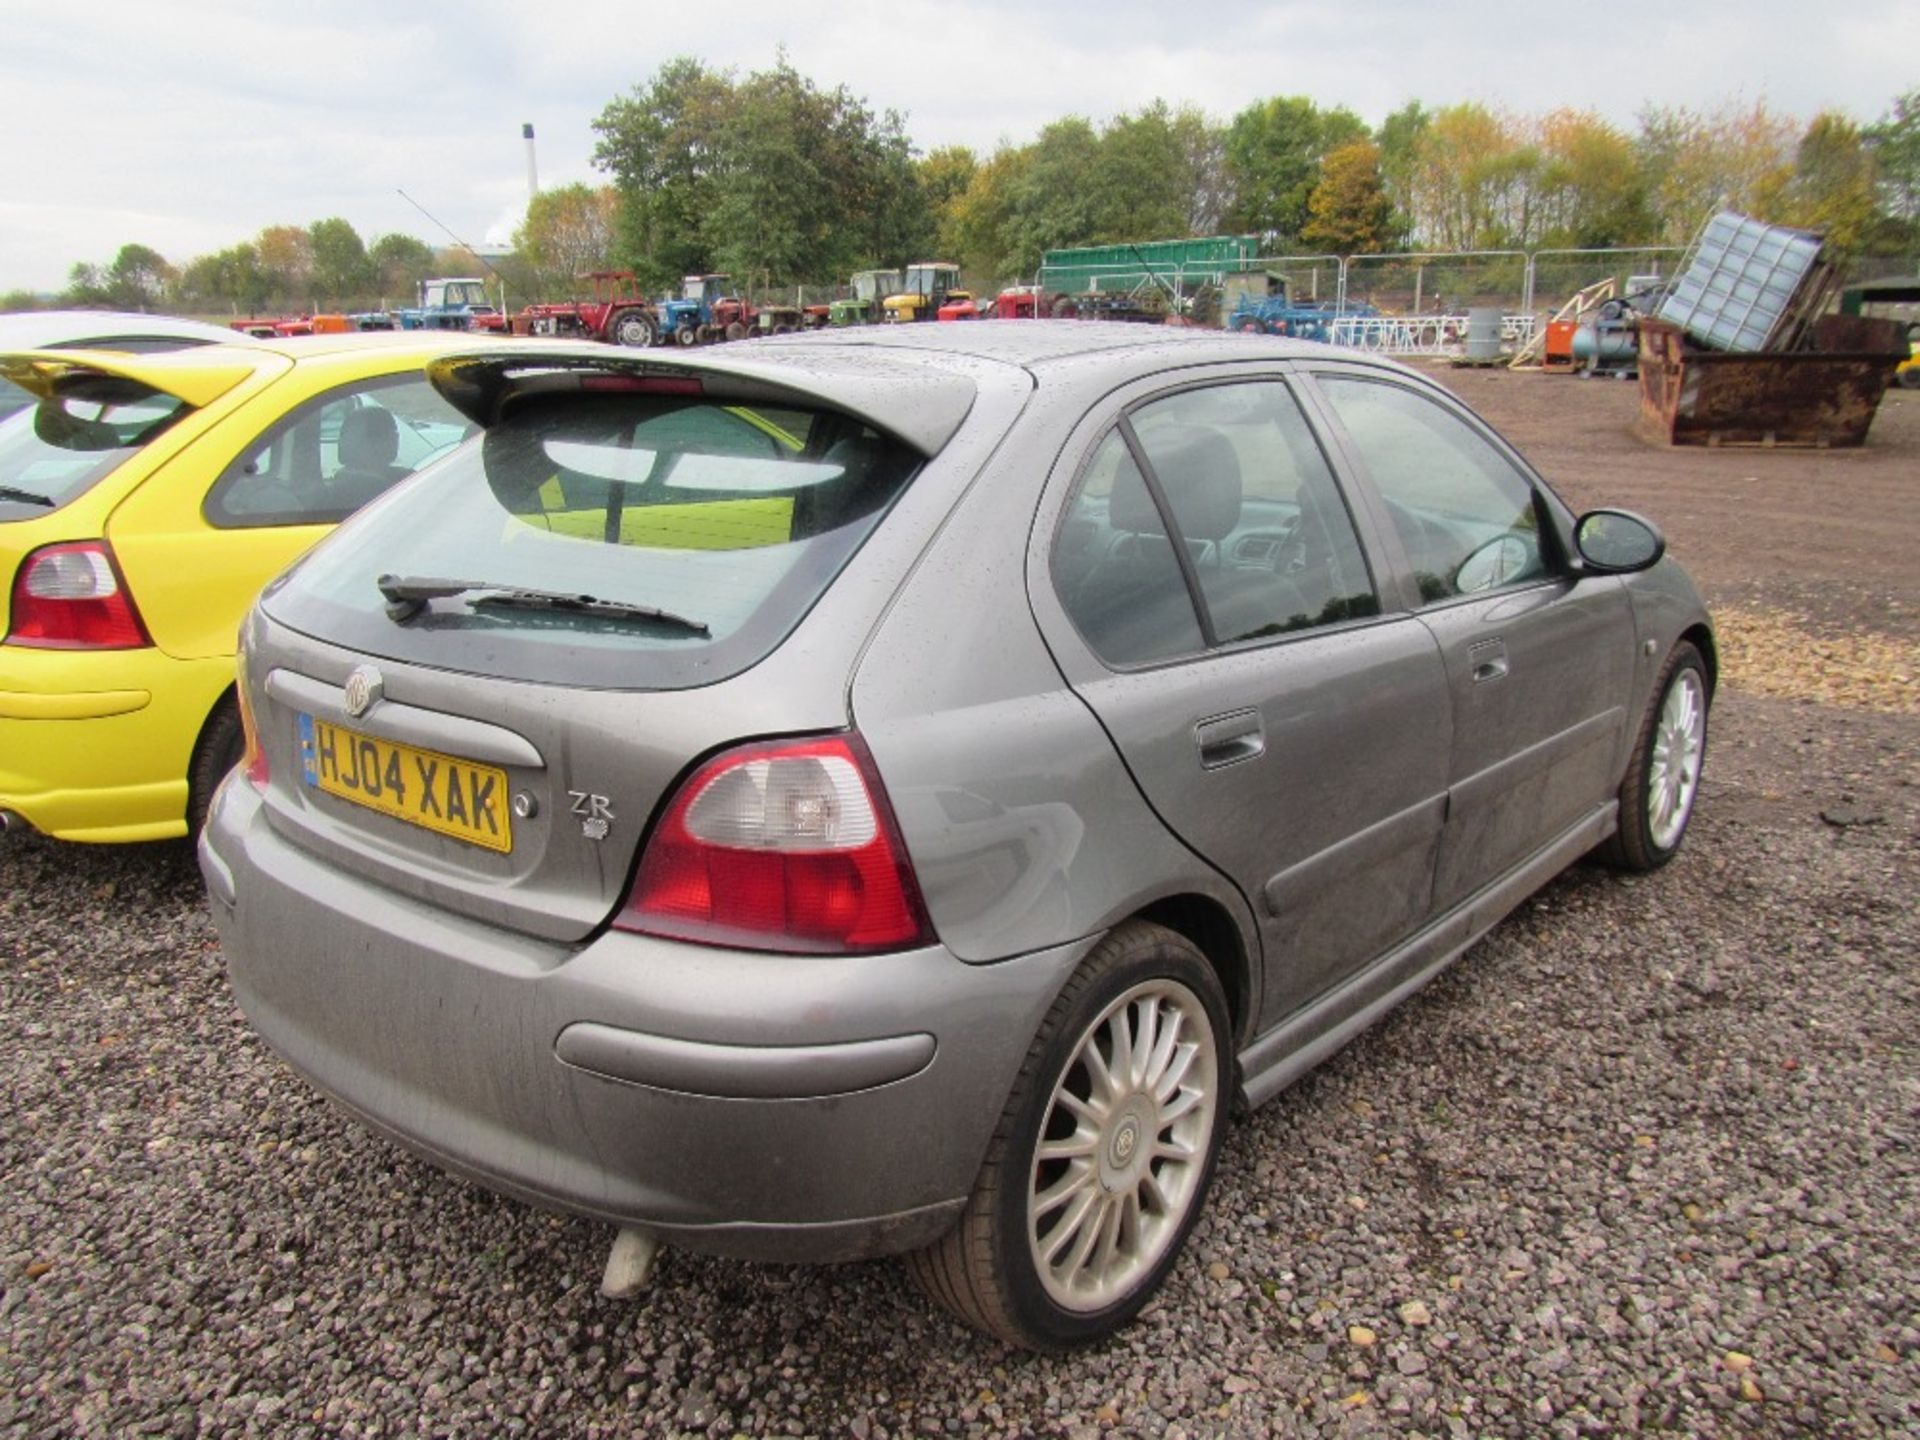 MG ZR 2.0 TD 115 Diesel Manual with Sunroof, Air Con, Half Leather Trim & 17inch Alloy Wheels. 3 - Image 3 of 5